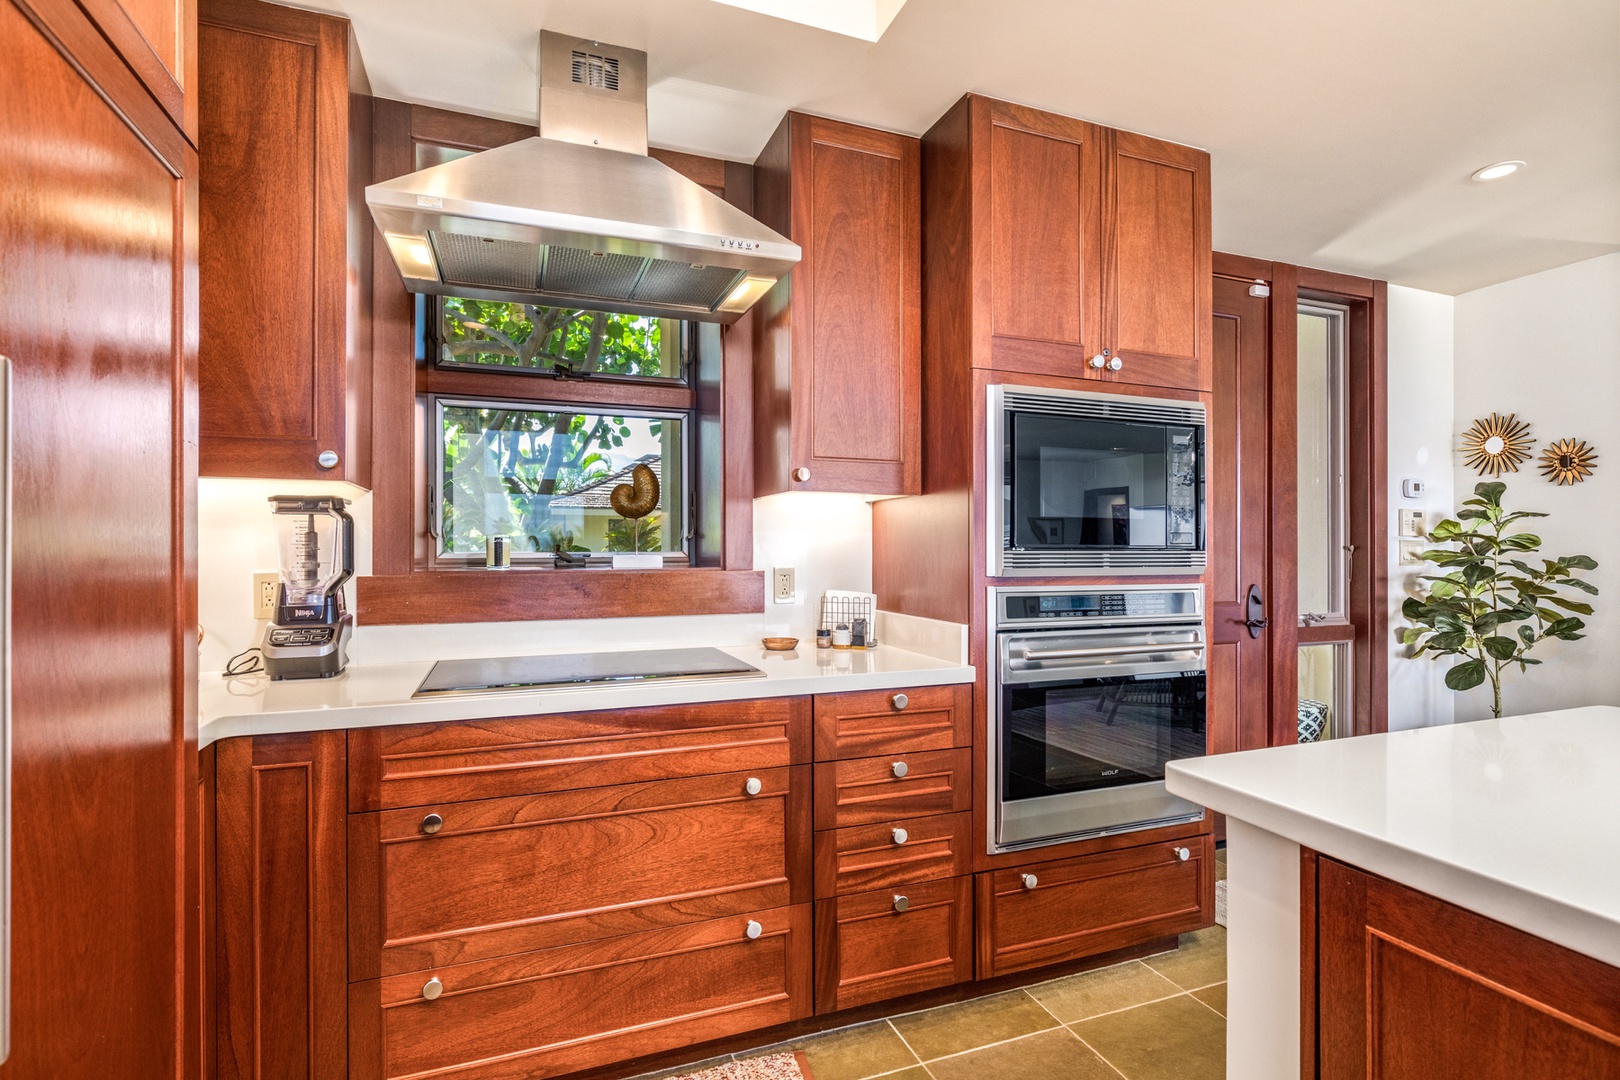 Kailua Kona Vacation Rentals, 3BD Hainoa Villa (2907C) at Four Seasons Resort at Hualalai - Sleek and elegant kitchen fully equipped with everything you could ever need for meals in.